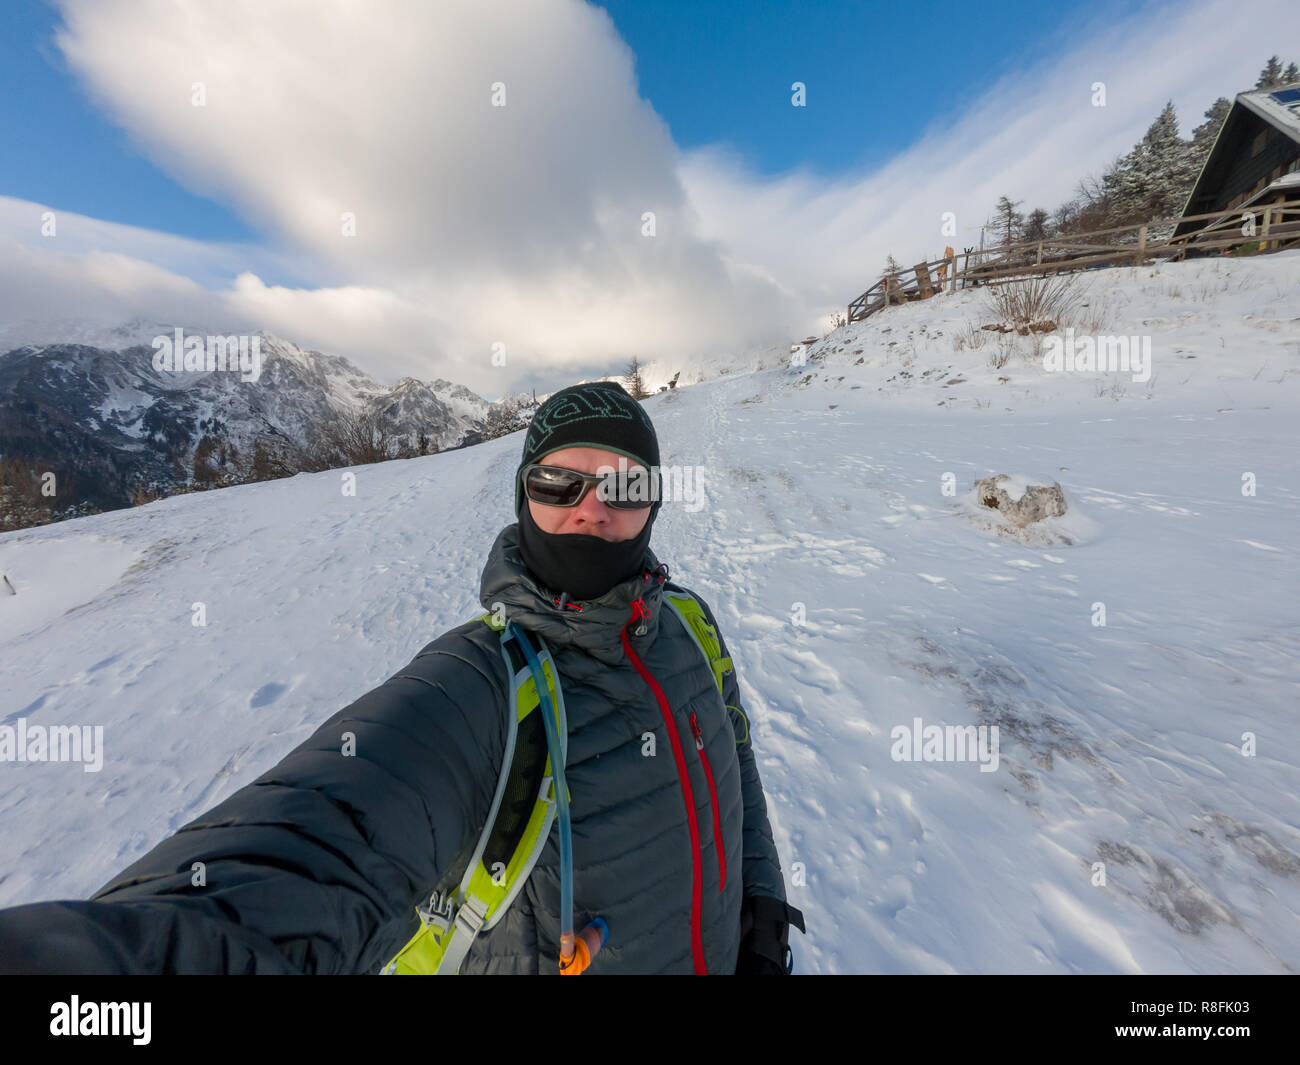 Mountaineer taking winter selfie while posing at snow covered hills. Active outdoor person enjoying cold weather. Stock Photo